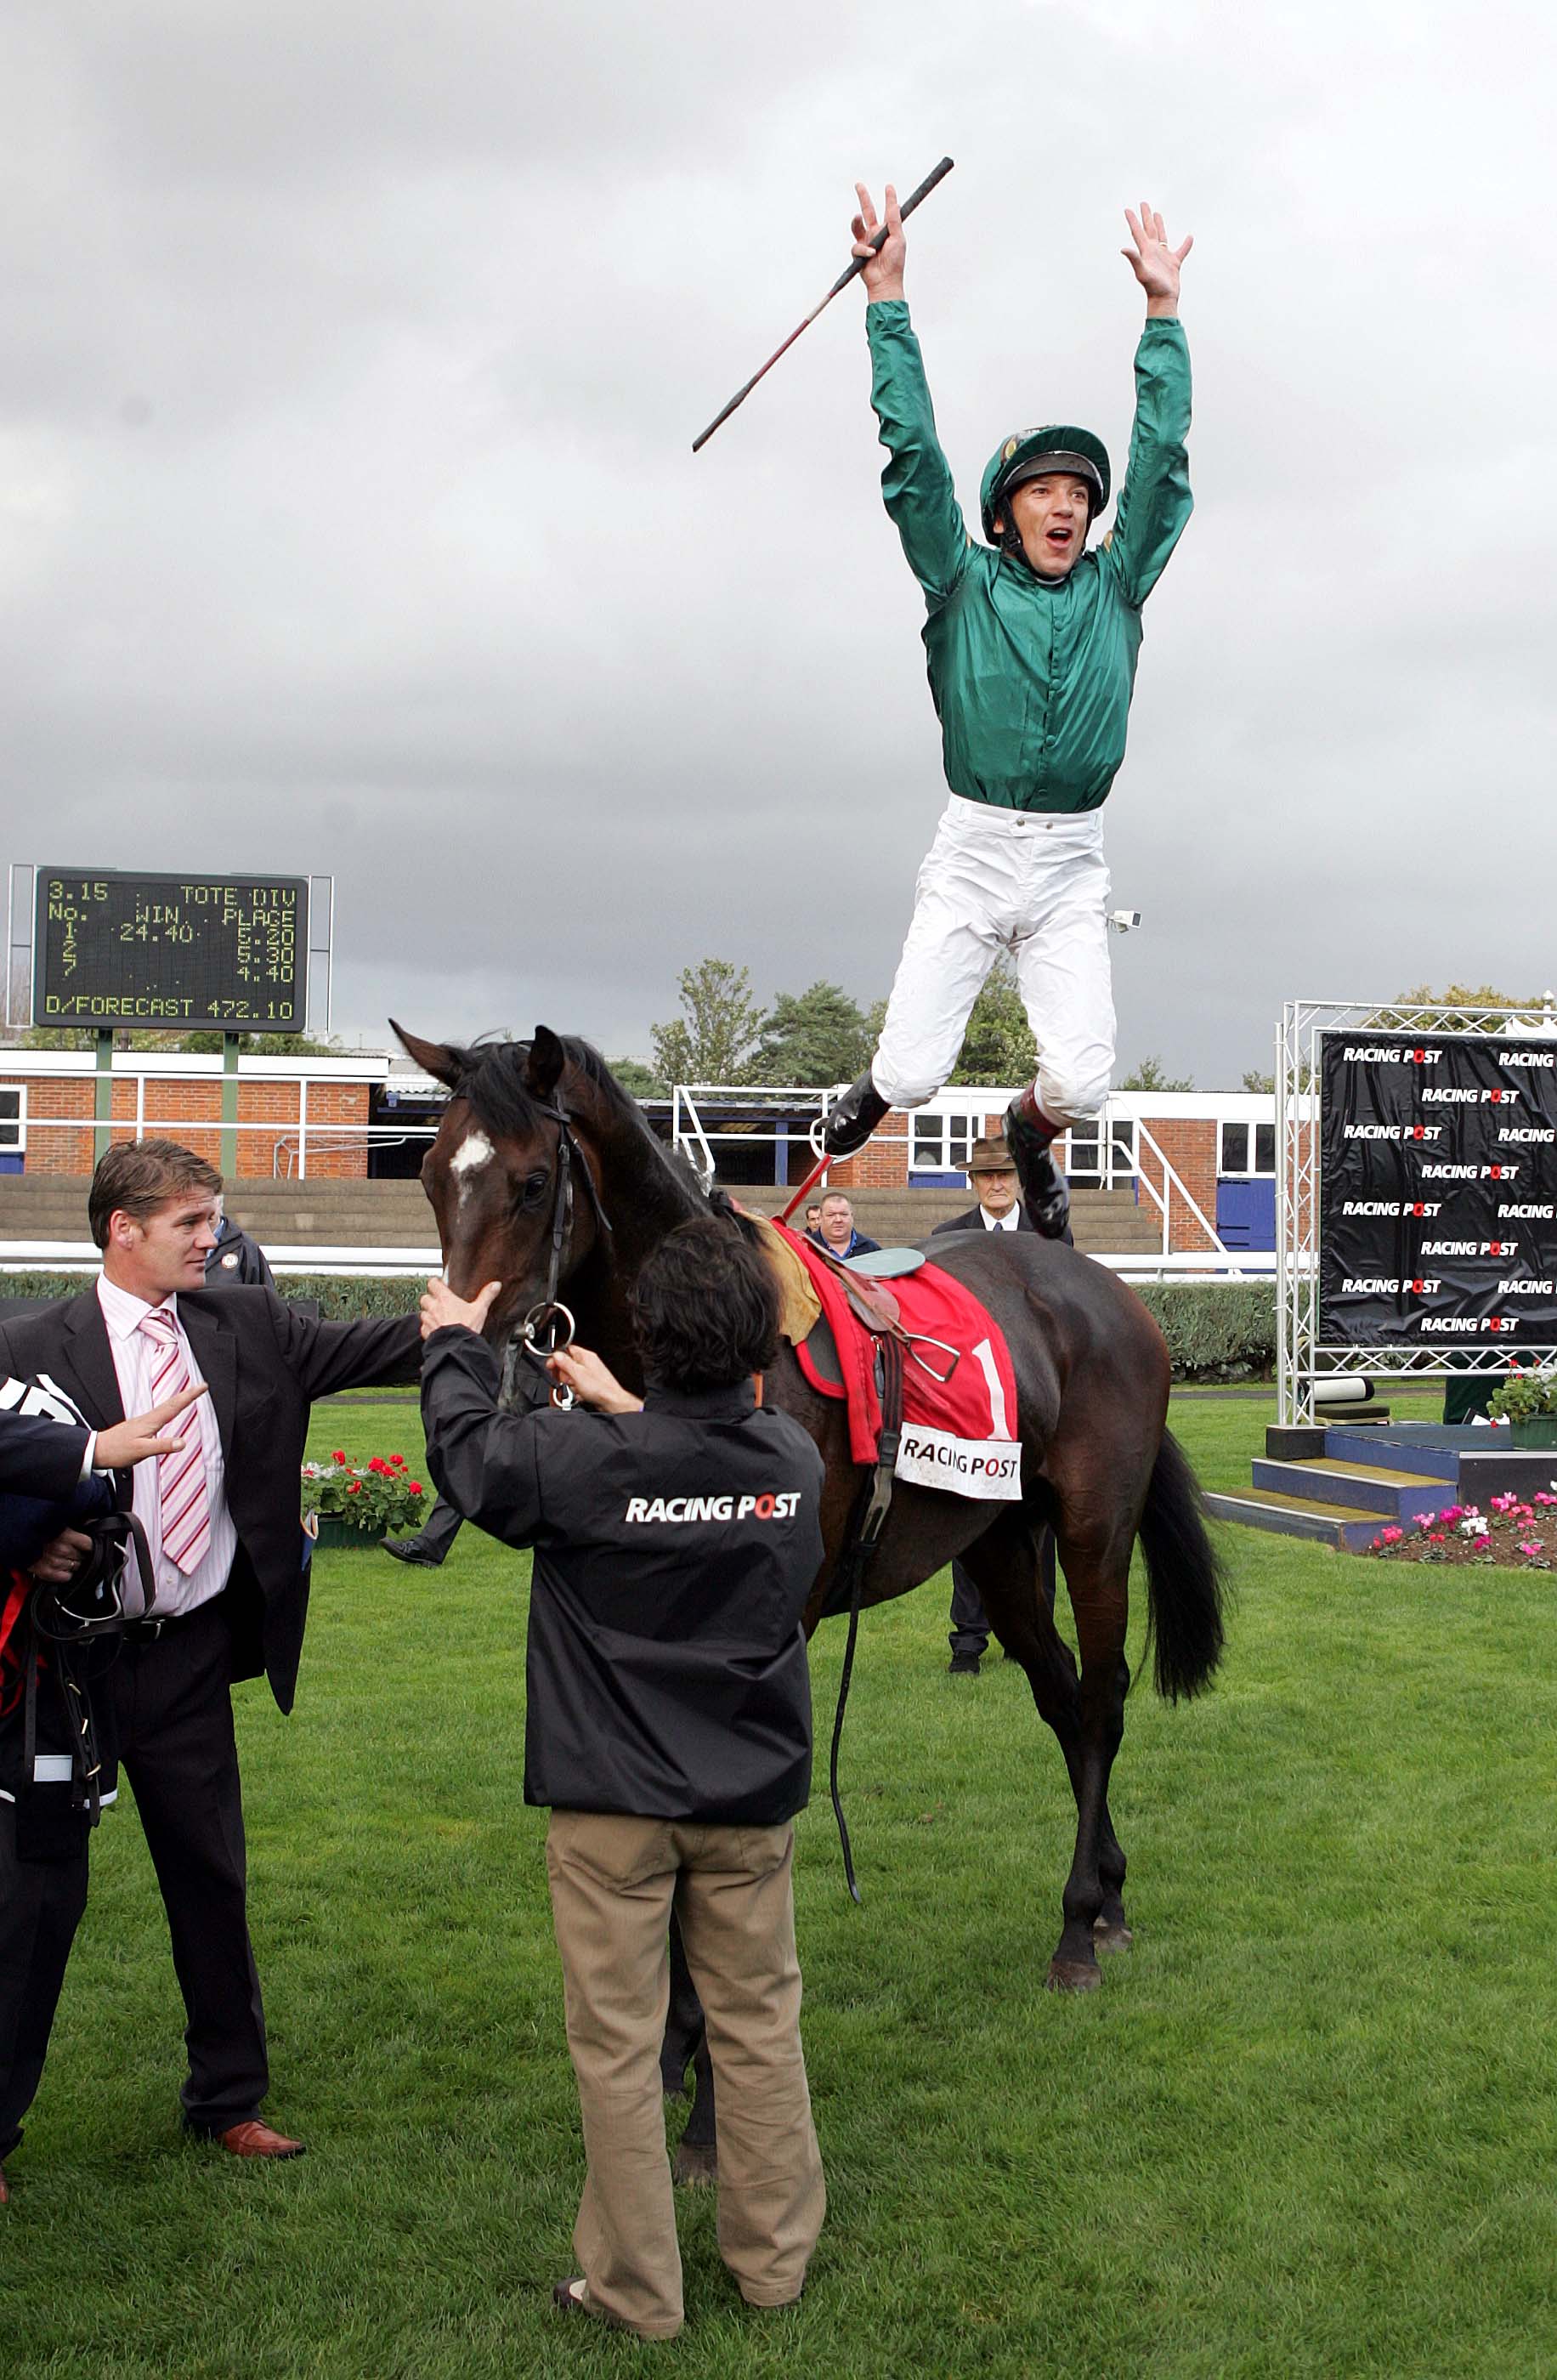 Flying dismount: Frankie Dettori performs his trademark leap out of the saddle after winning the G1 Racing Post Trophy on subsequent Derby winner Authorized at Newbury in 2006. Photo: Dan Abraham/focusonracing.com